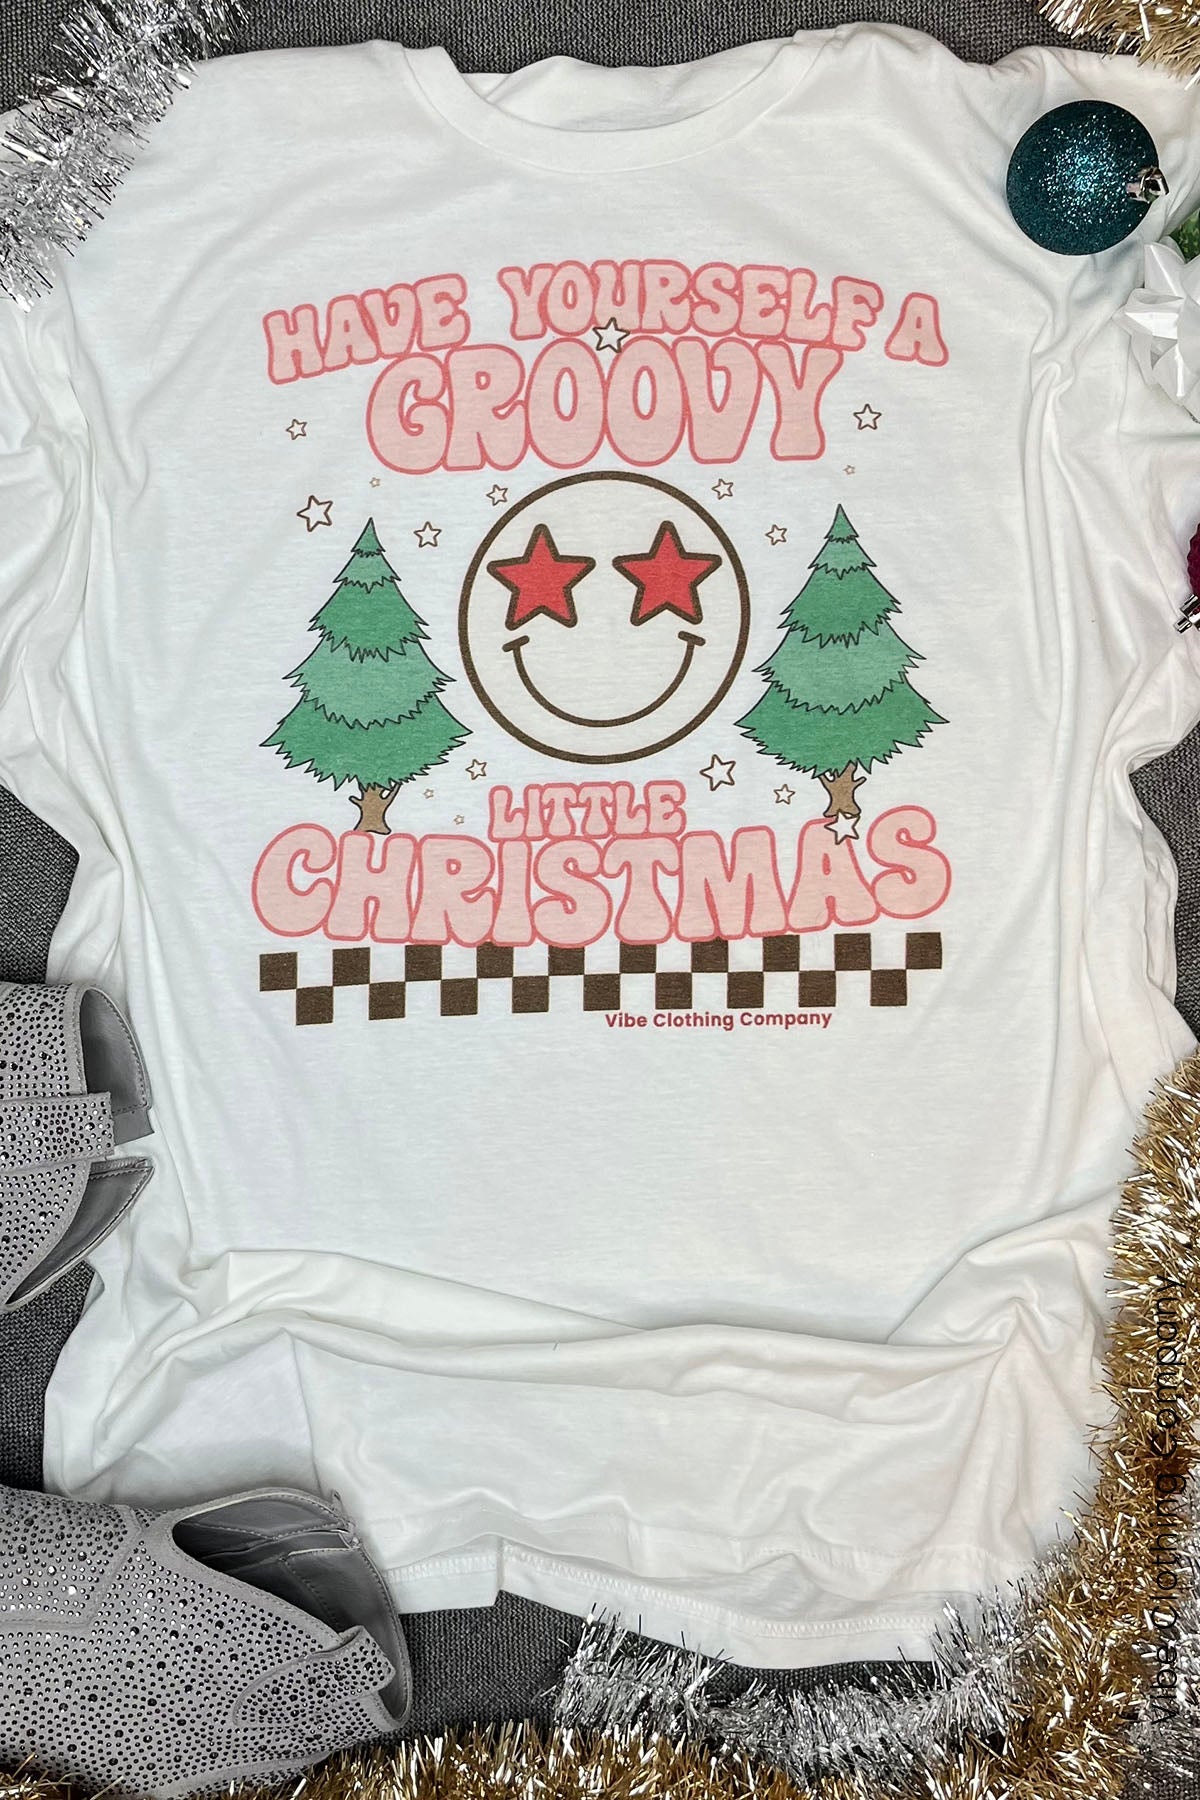 Groovy Christmas Graphic Tee by Vibe Clothing